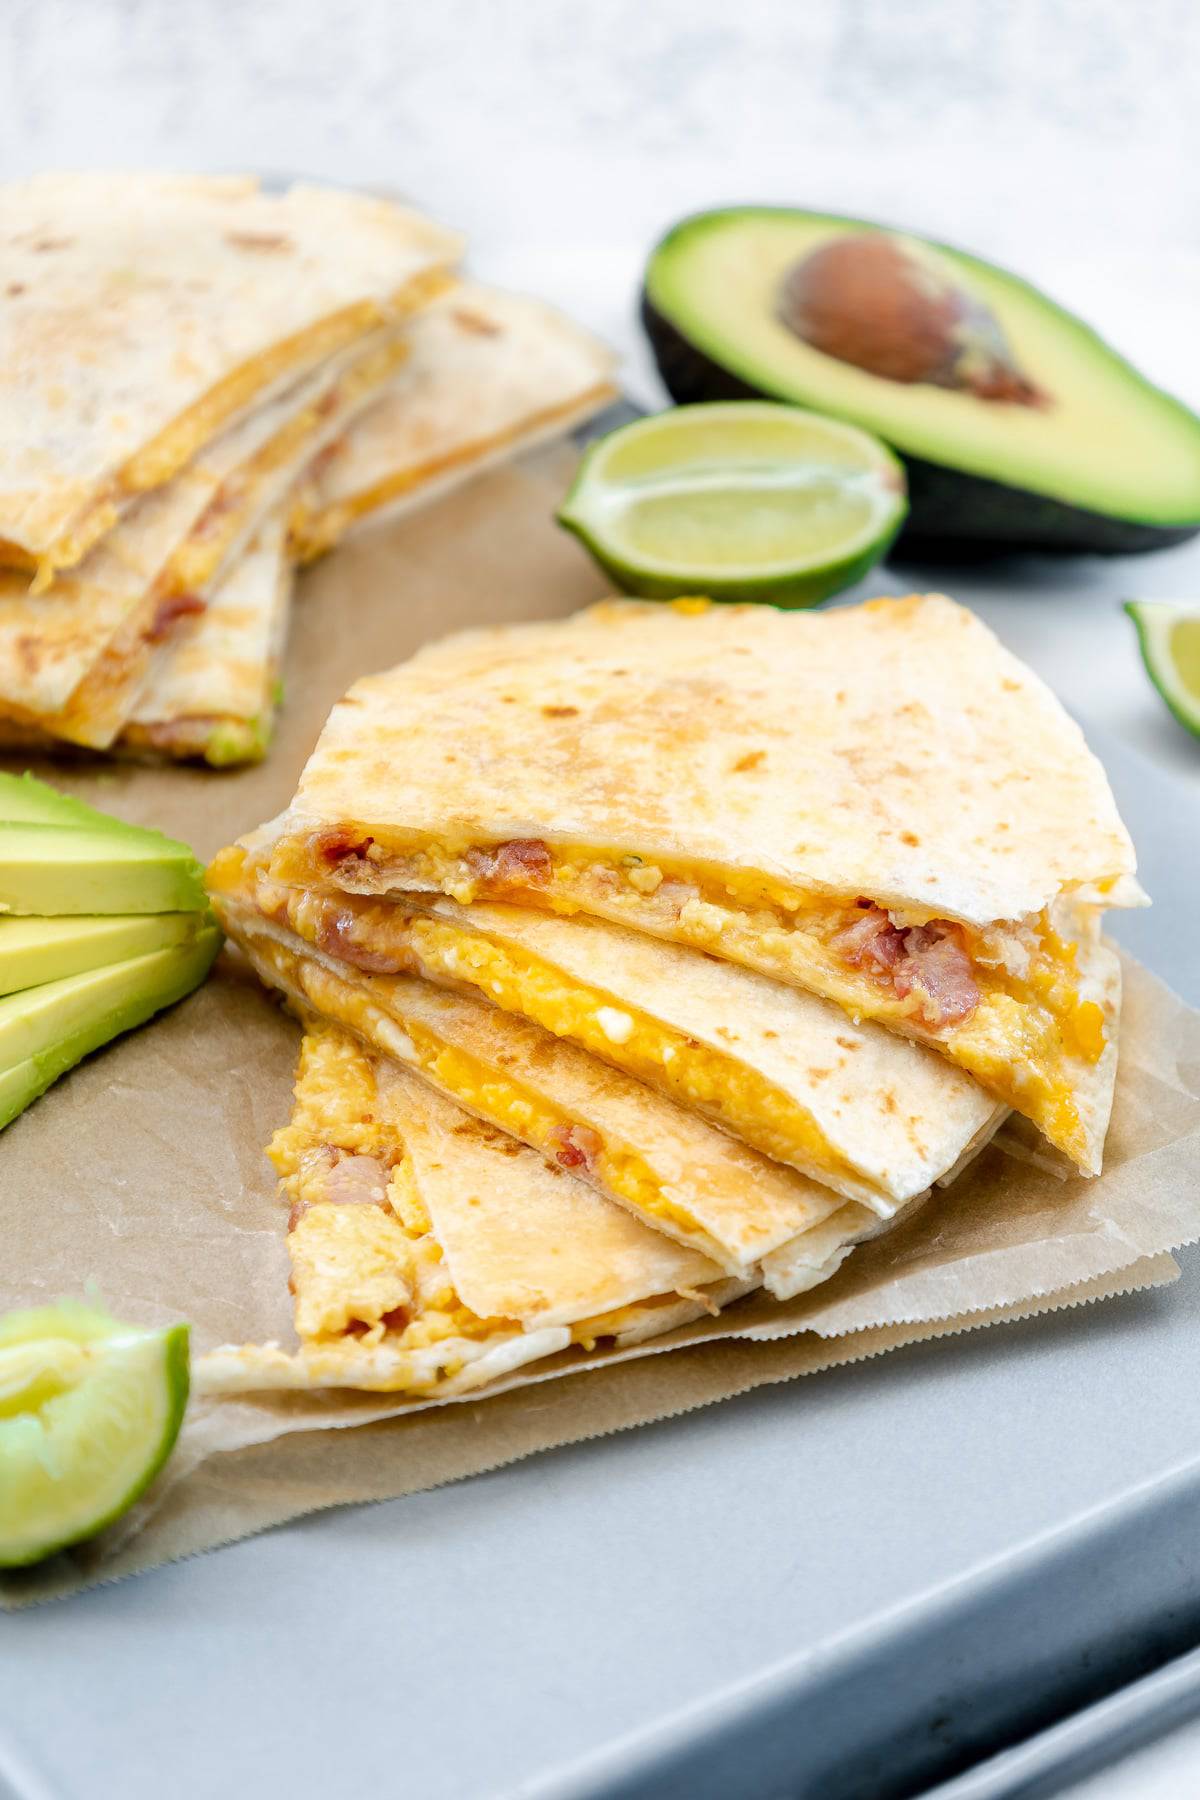 A breakfast quesadilla sliced on parchment paper with fresh lime wedges and halved avacados.